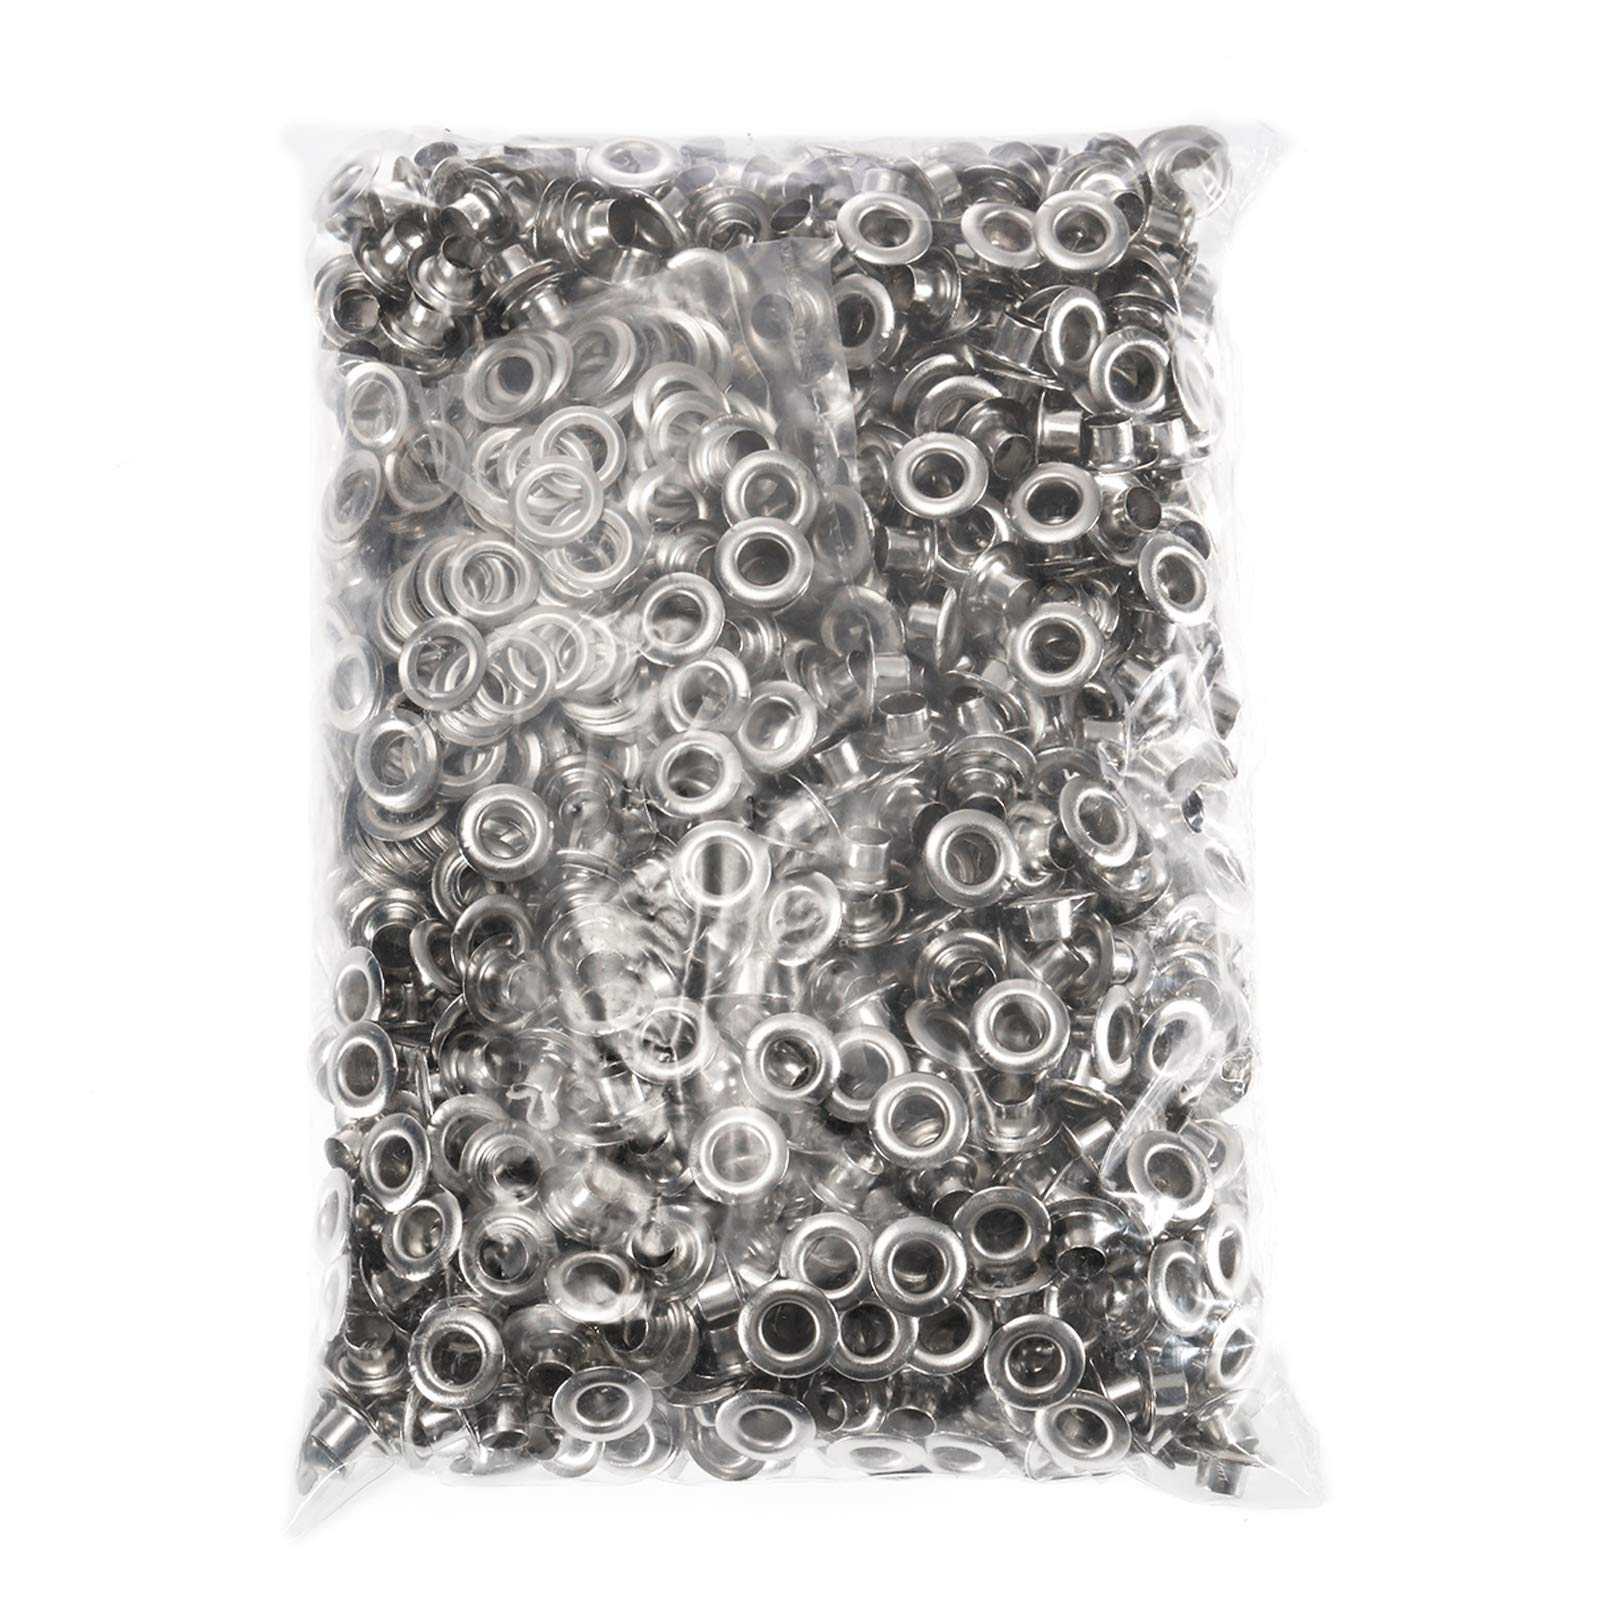 100 Sets 10mm 3/8 Hole Metal Grommets Eyelets Silver Tone for Fabric  Leather Canvas